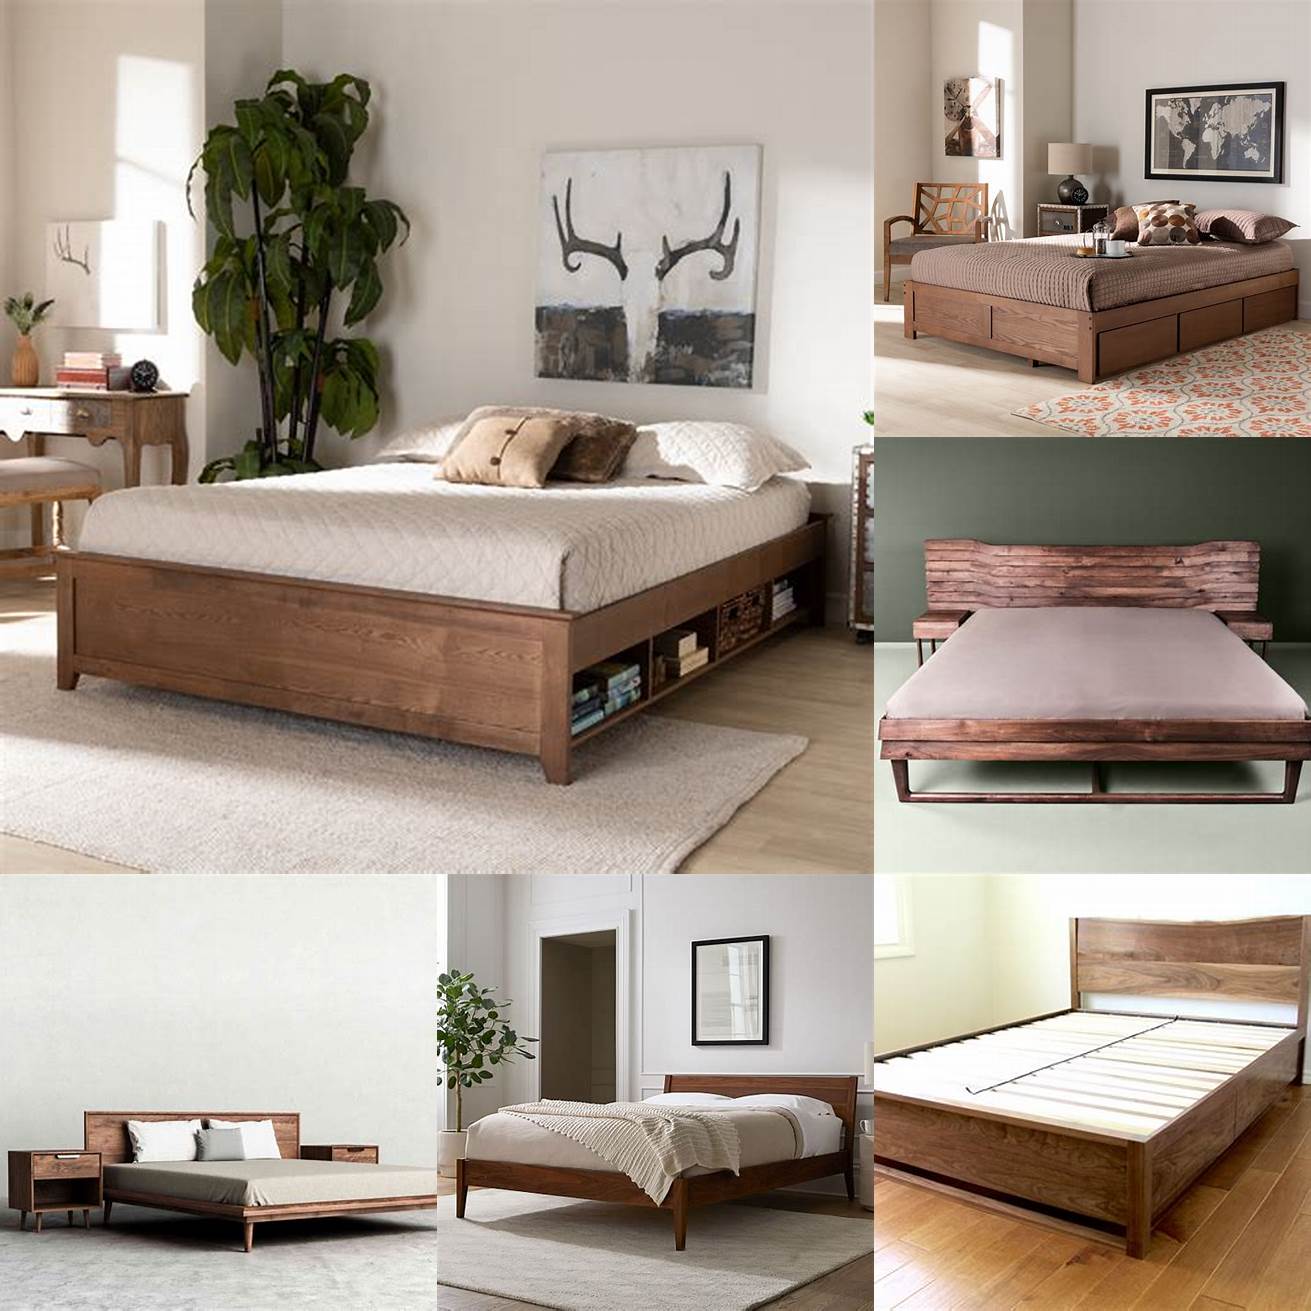 A beautiful walnut bed frame can add elegance and sophistication to your bedroom